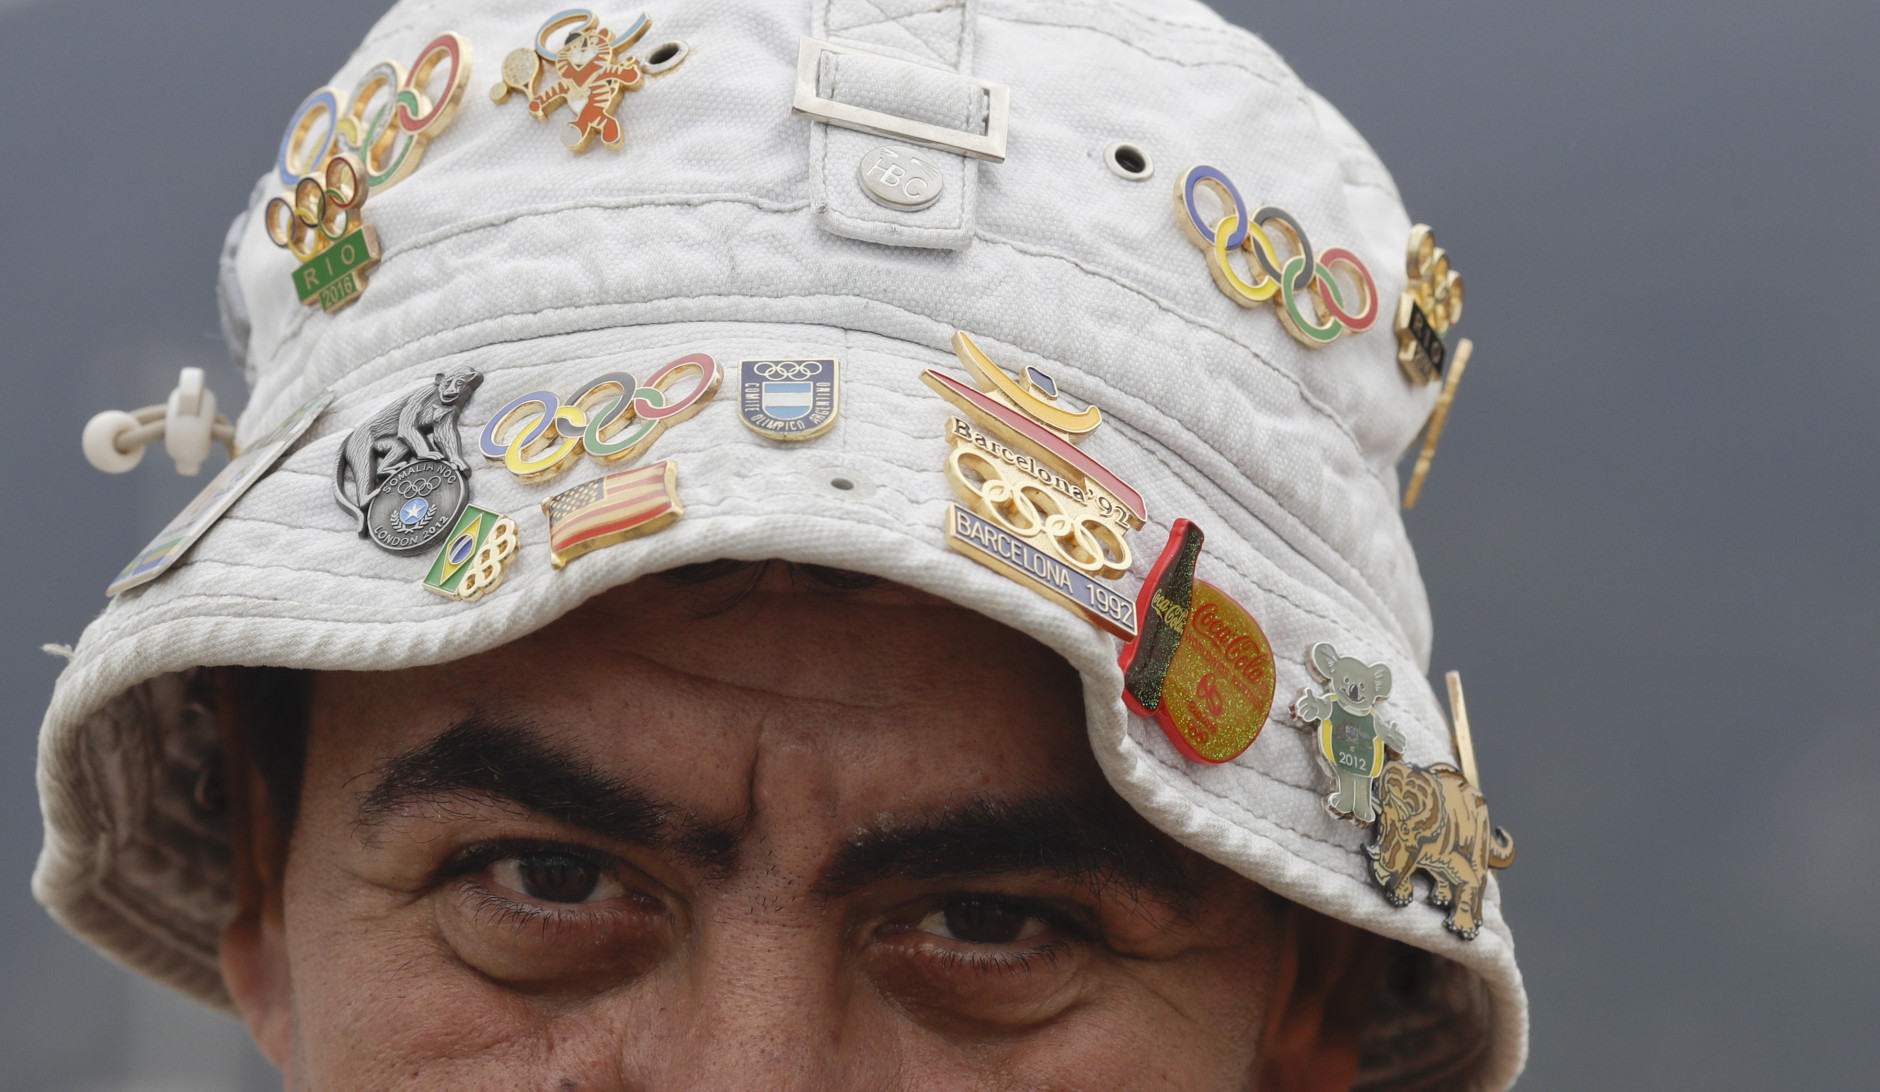 A man wearing a hat with pins poses for a picture outside the Olympic village ahead of the 2016 Summer Olympics in Rio de Janeiro, Brazil, Wednesday, Aug. 3, 2016. The Games opening ceremony is on Friday.(AP Photo/Natacha Pisarenko)